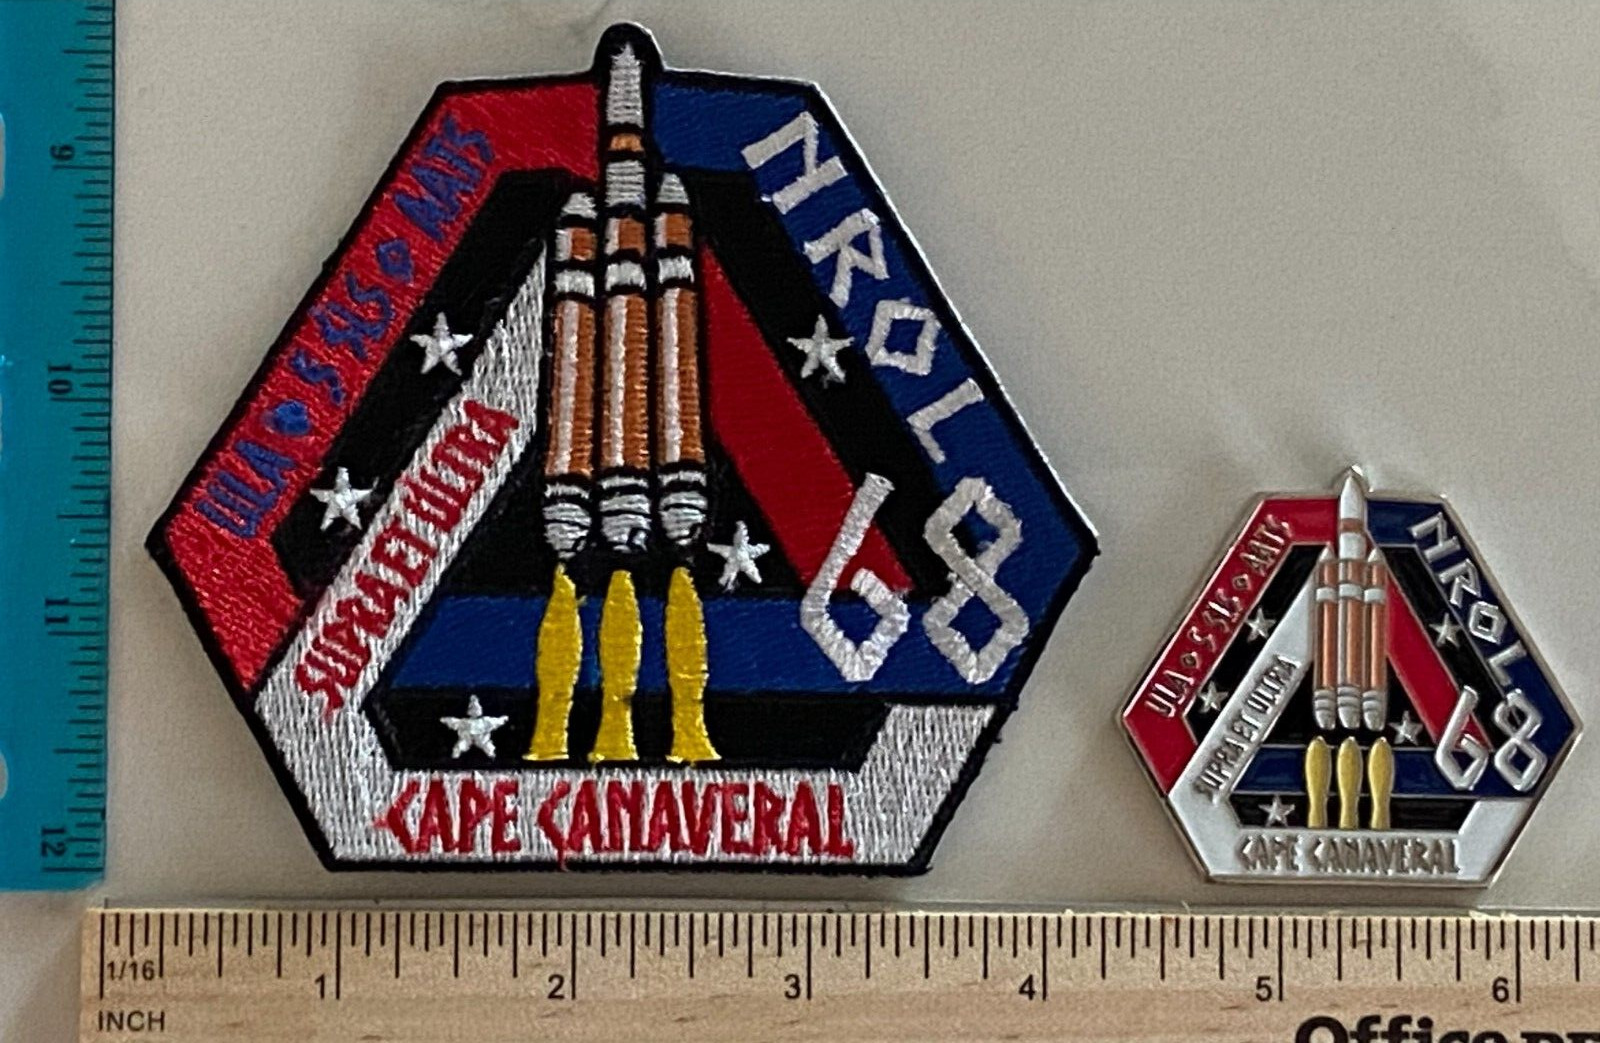 MILITARY BLACK OPS COIN AND PATCH SET - NROL-68 CAPE CANAVERAL SUPRA ET ULTRA